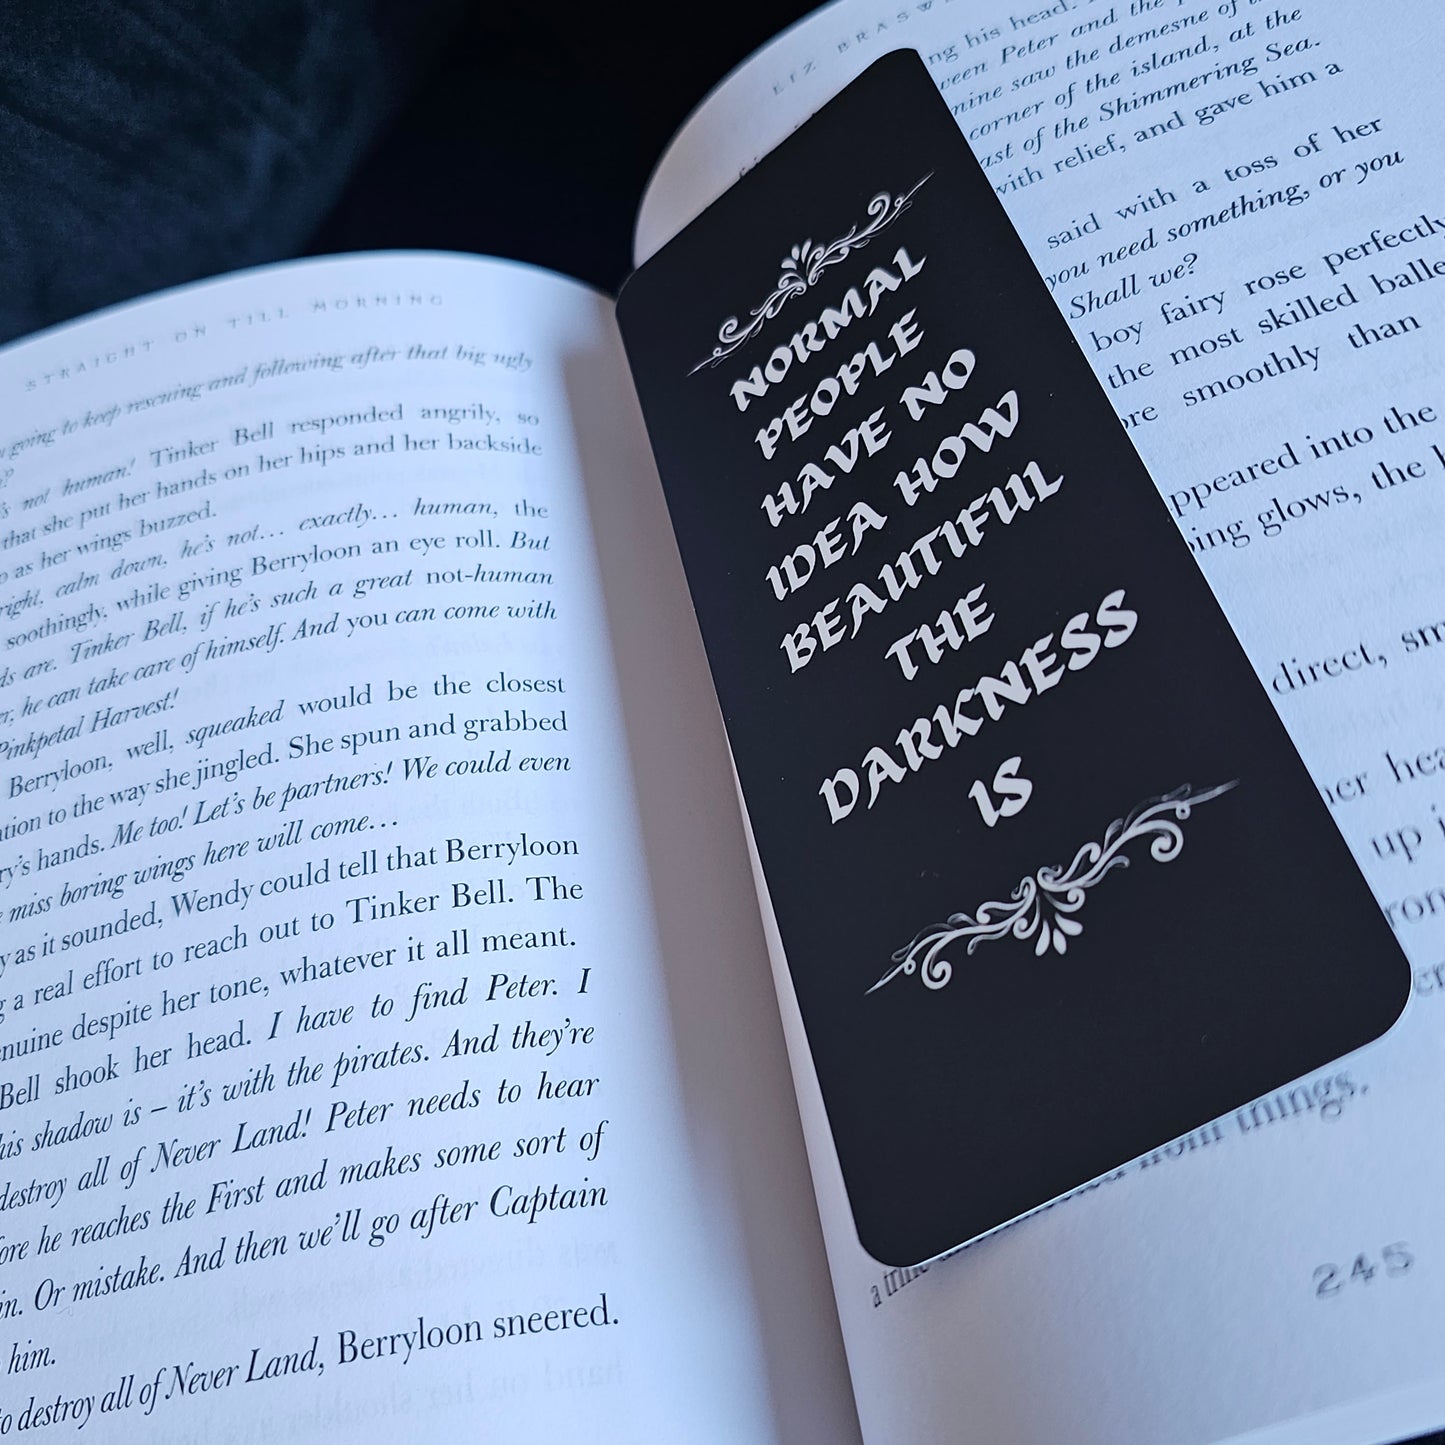 The Darkness is Beautiful - Bookmarks for Dark Literature